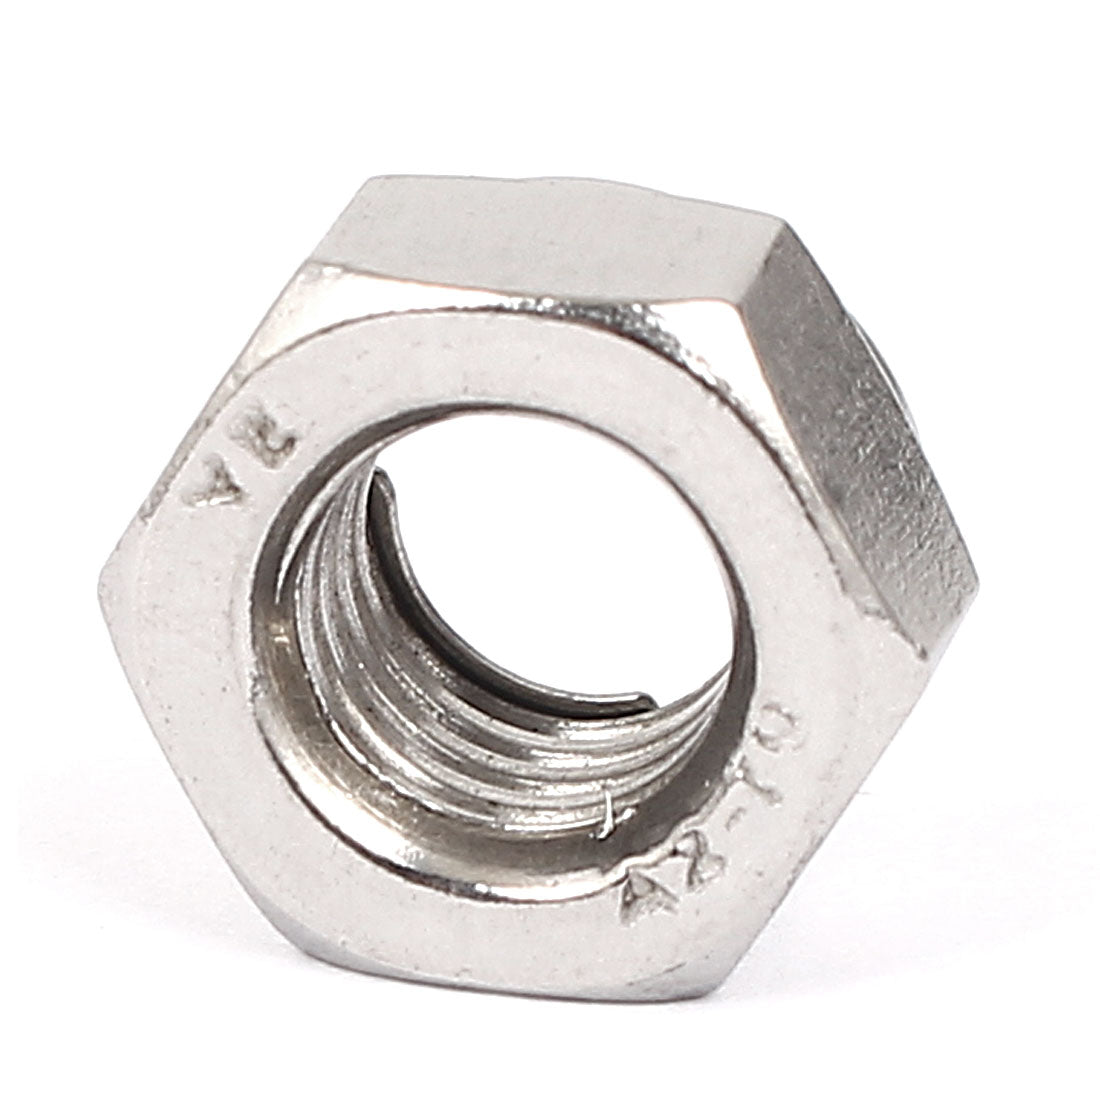 uxcell Uxcell M8 304 Stainless Steel Self-Locking Metal Insert Hex Lock Nuts 10pcs